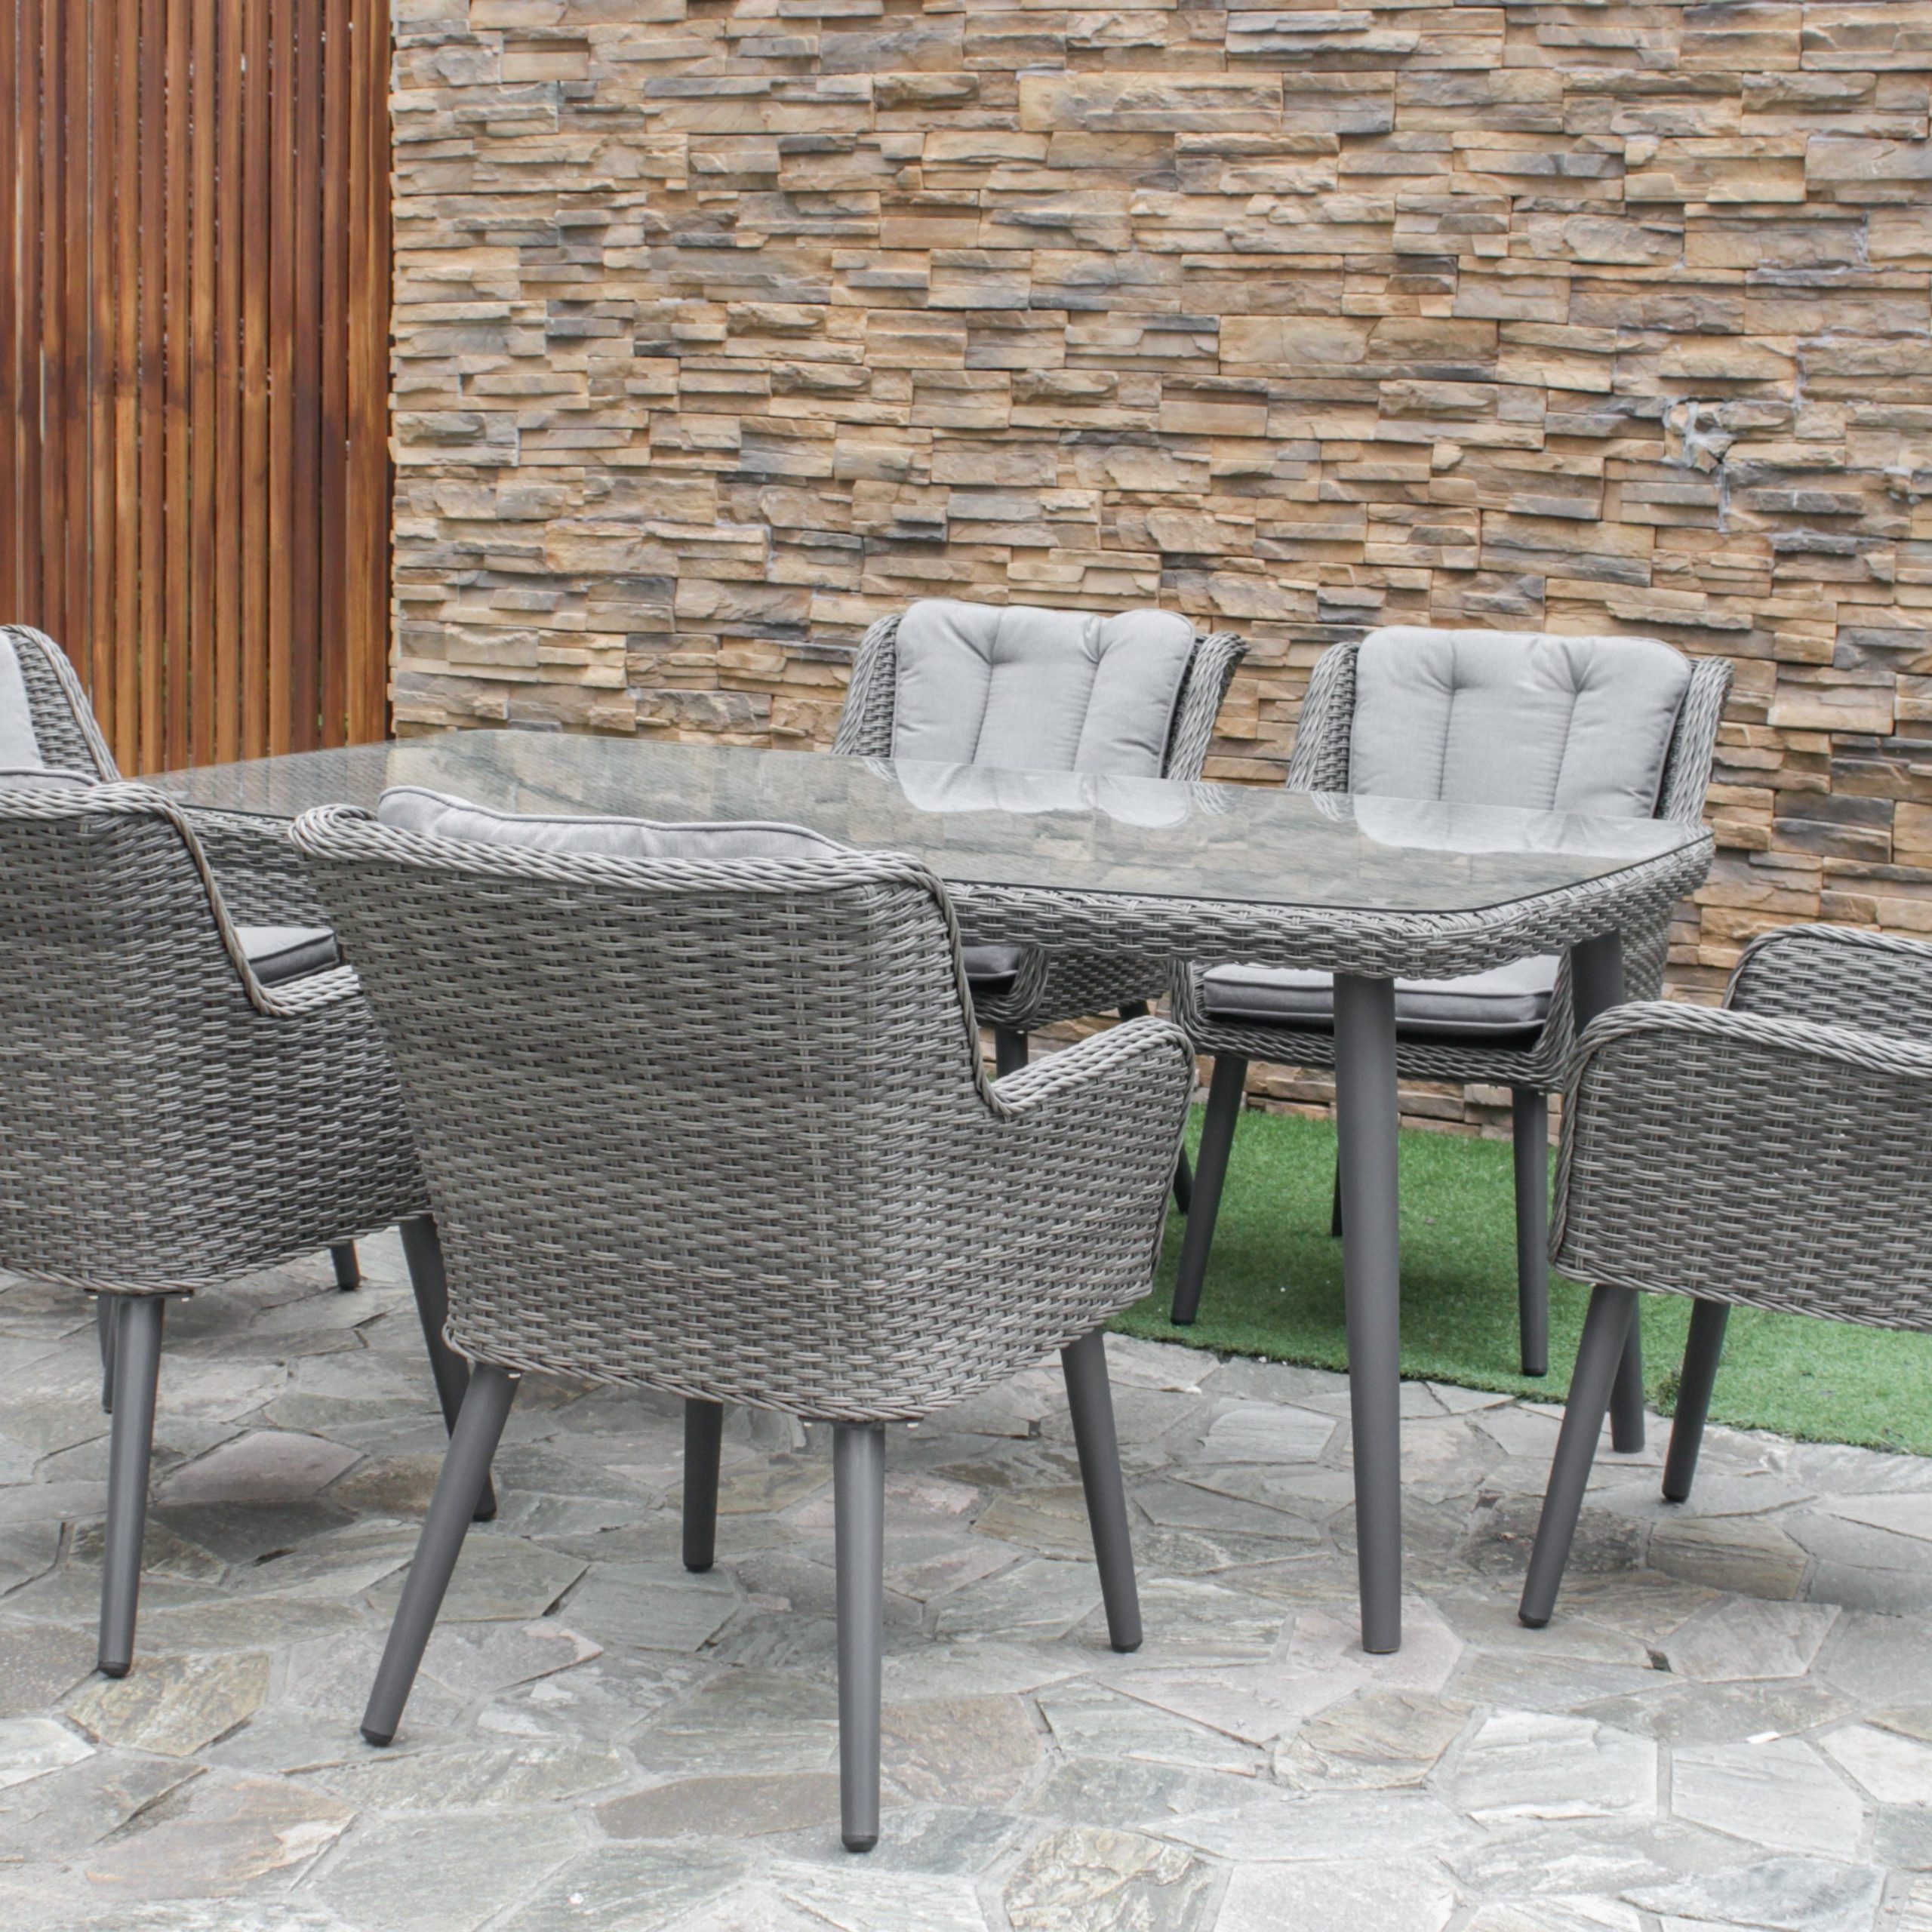 Most Up To Date Gray Wicker Rectangular Patio Dining Sets Pertaining To Maze Rattan Florence 6 Seat Rectangular Dining Set (View 11 of 15)